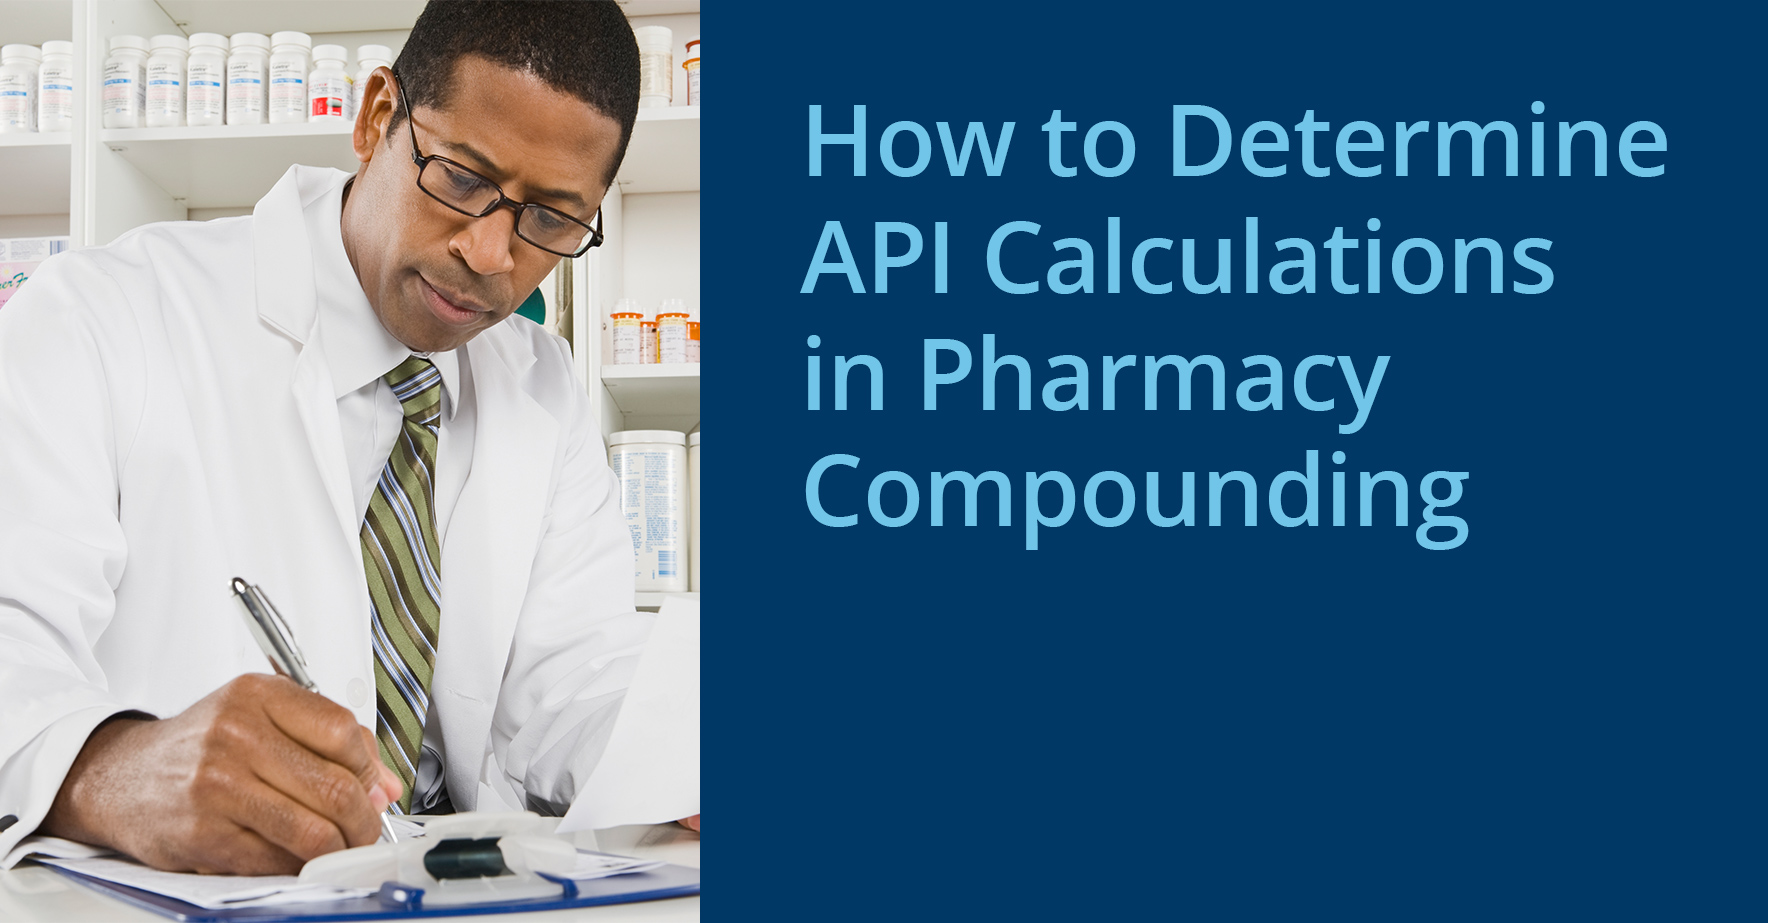 how_to_determine_api_calculations_in_pharmacy_compounding.jpg.jpg.